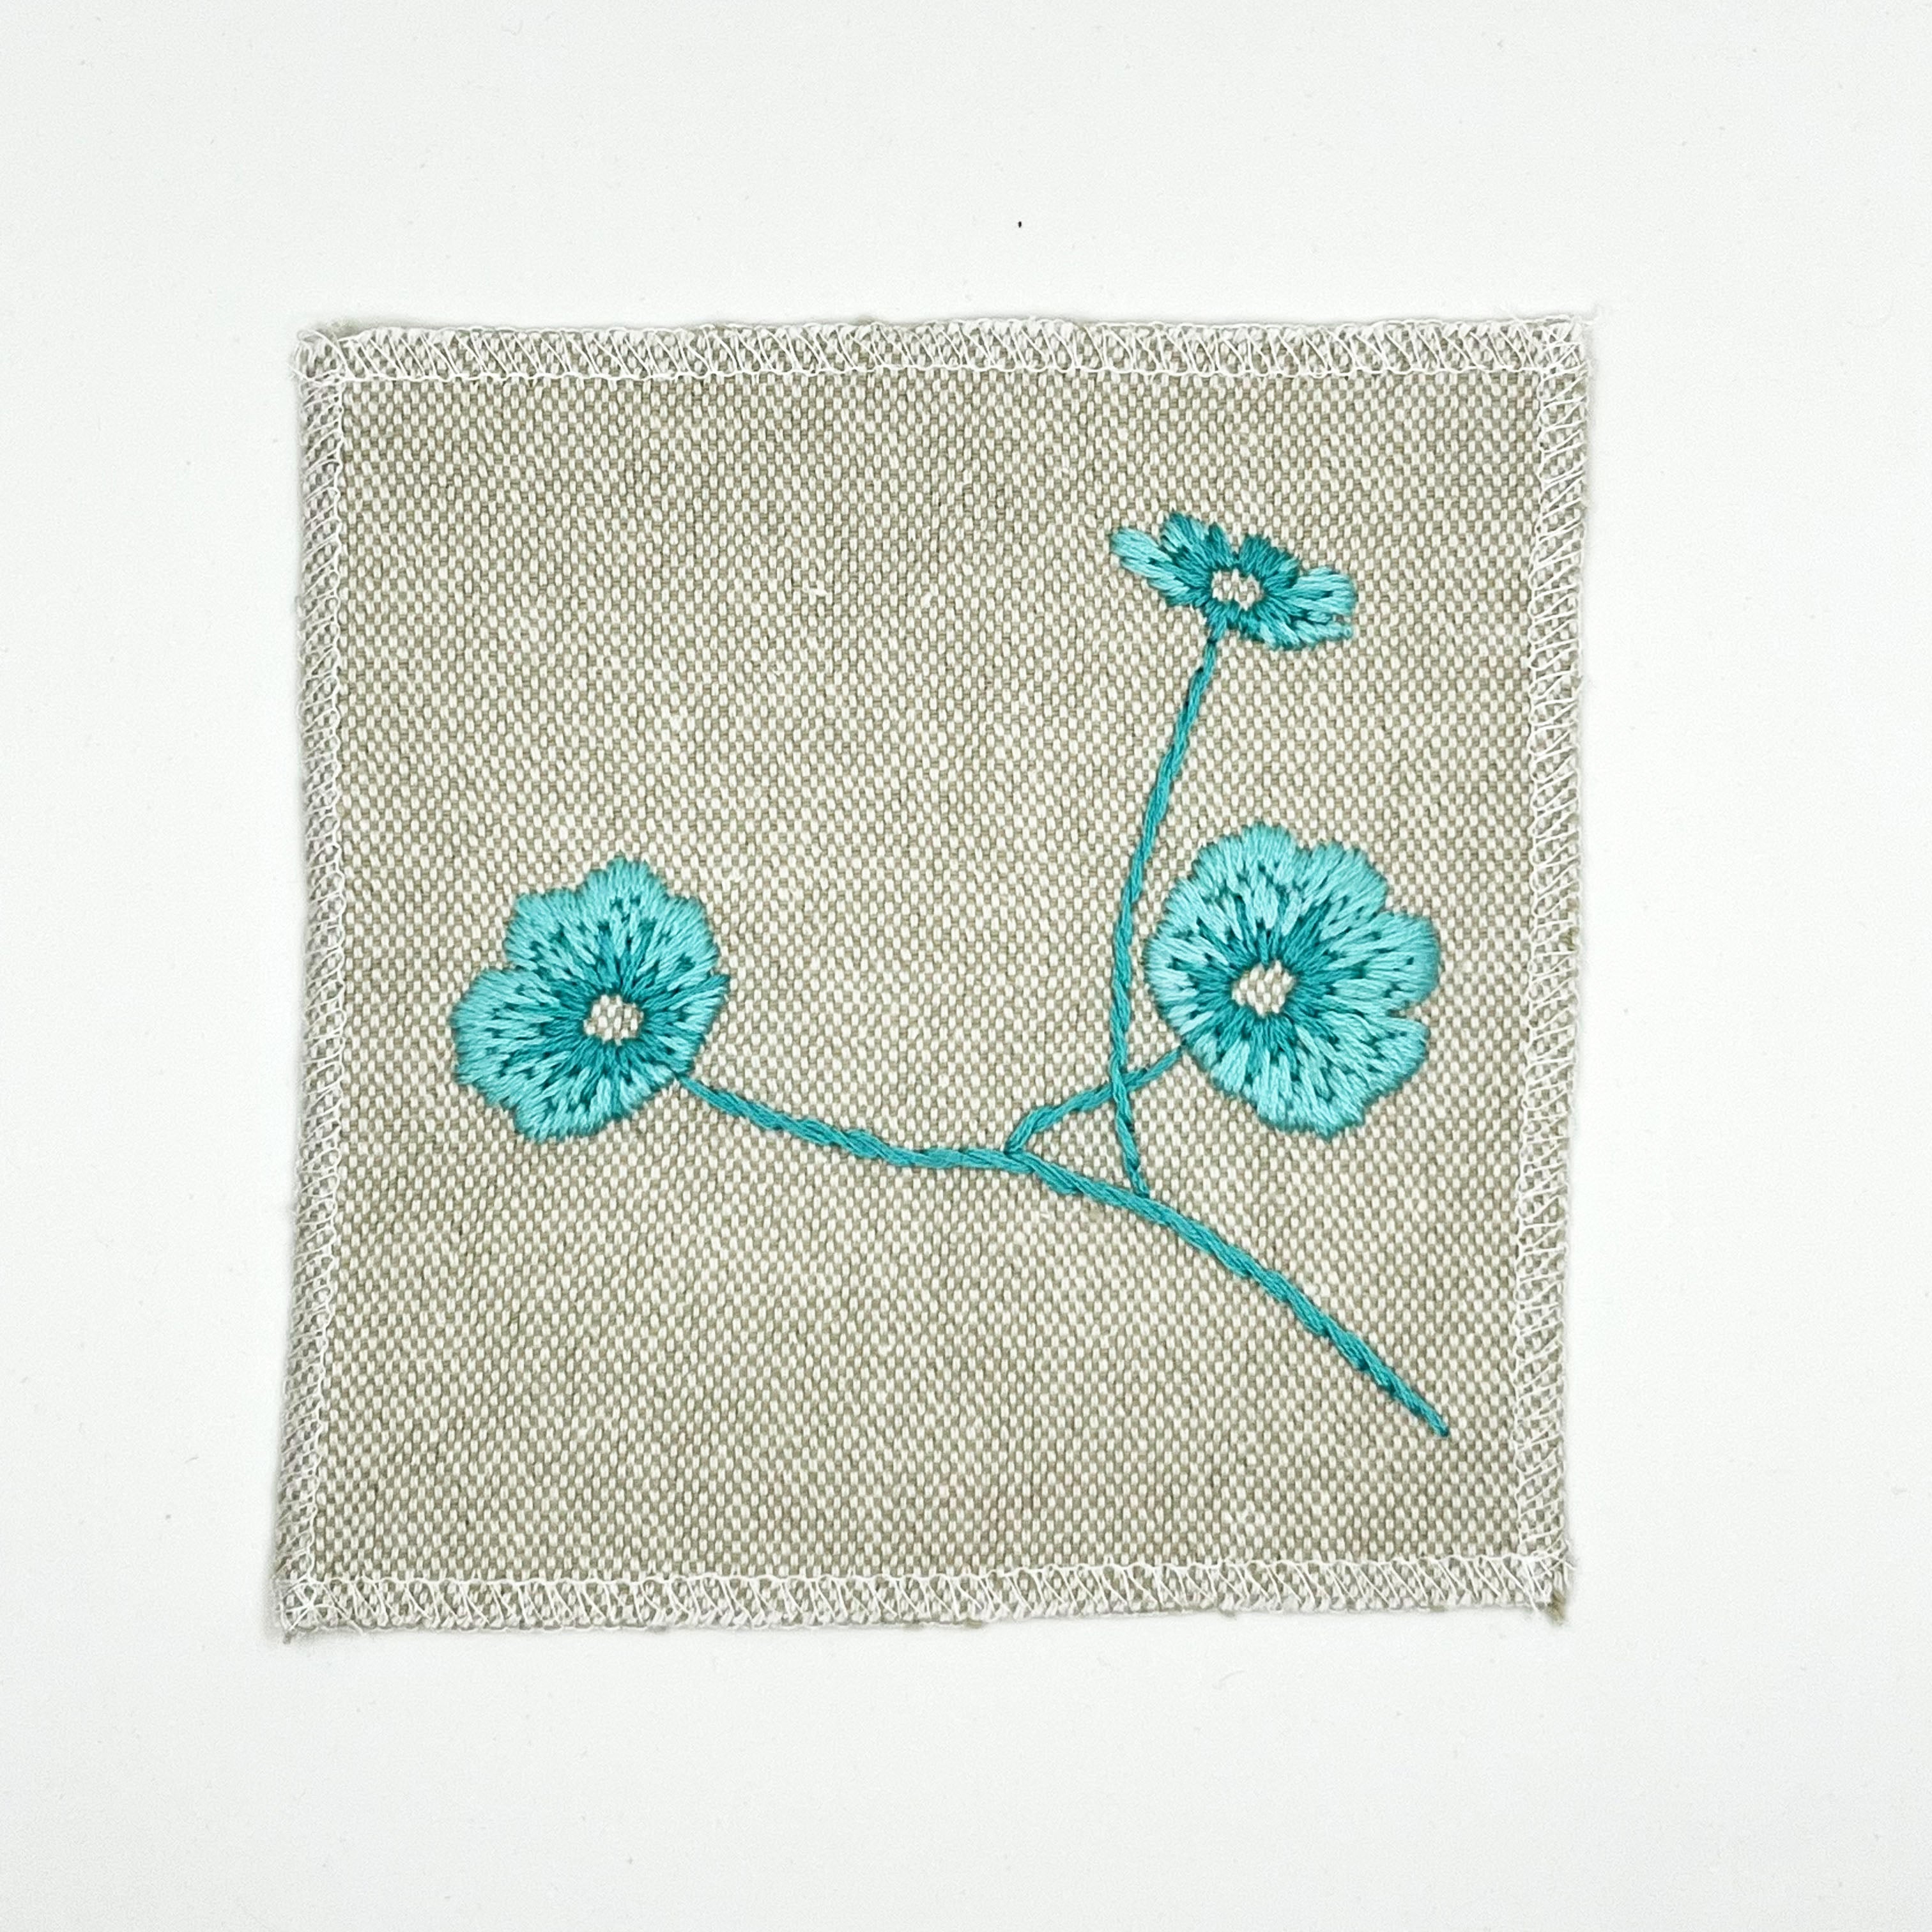 Hand Embroidered Poppies Patch